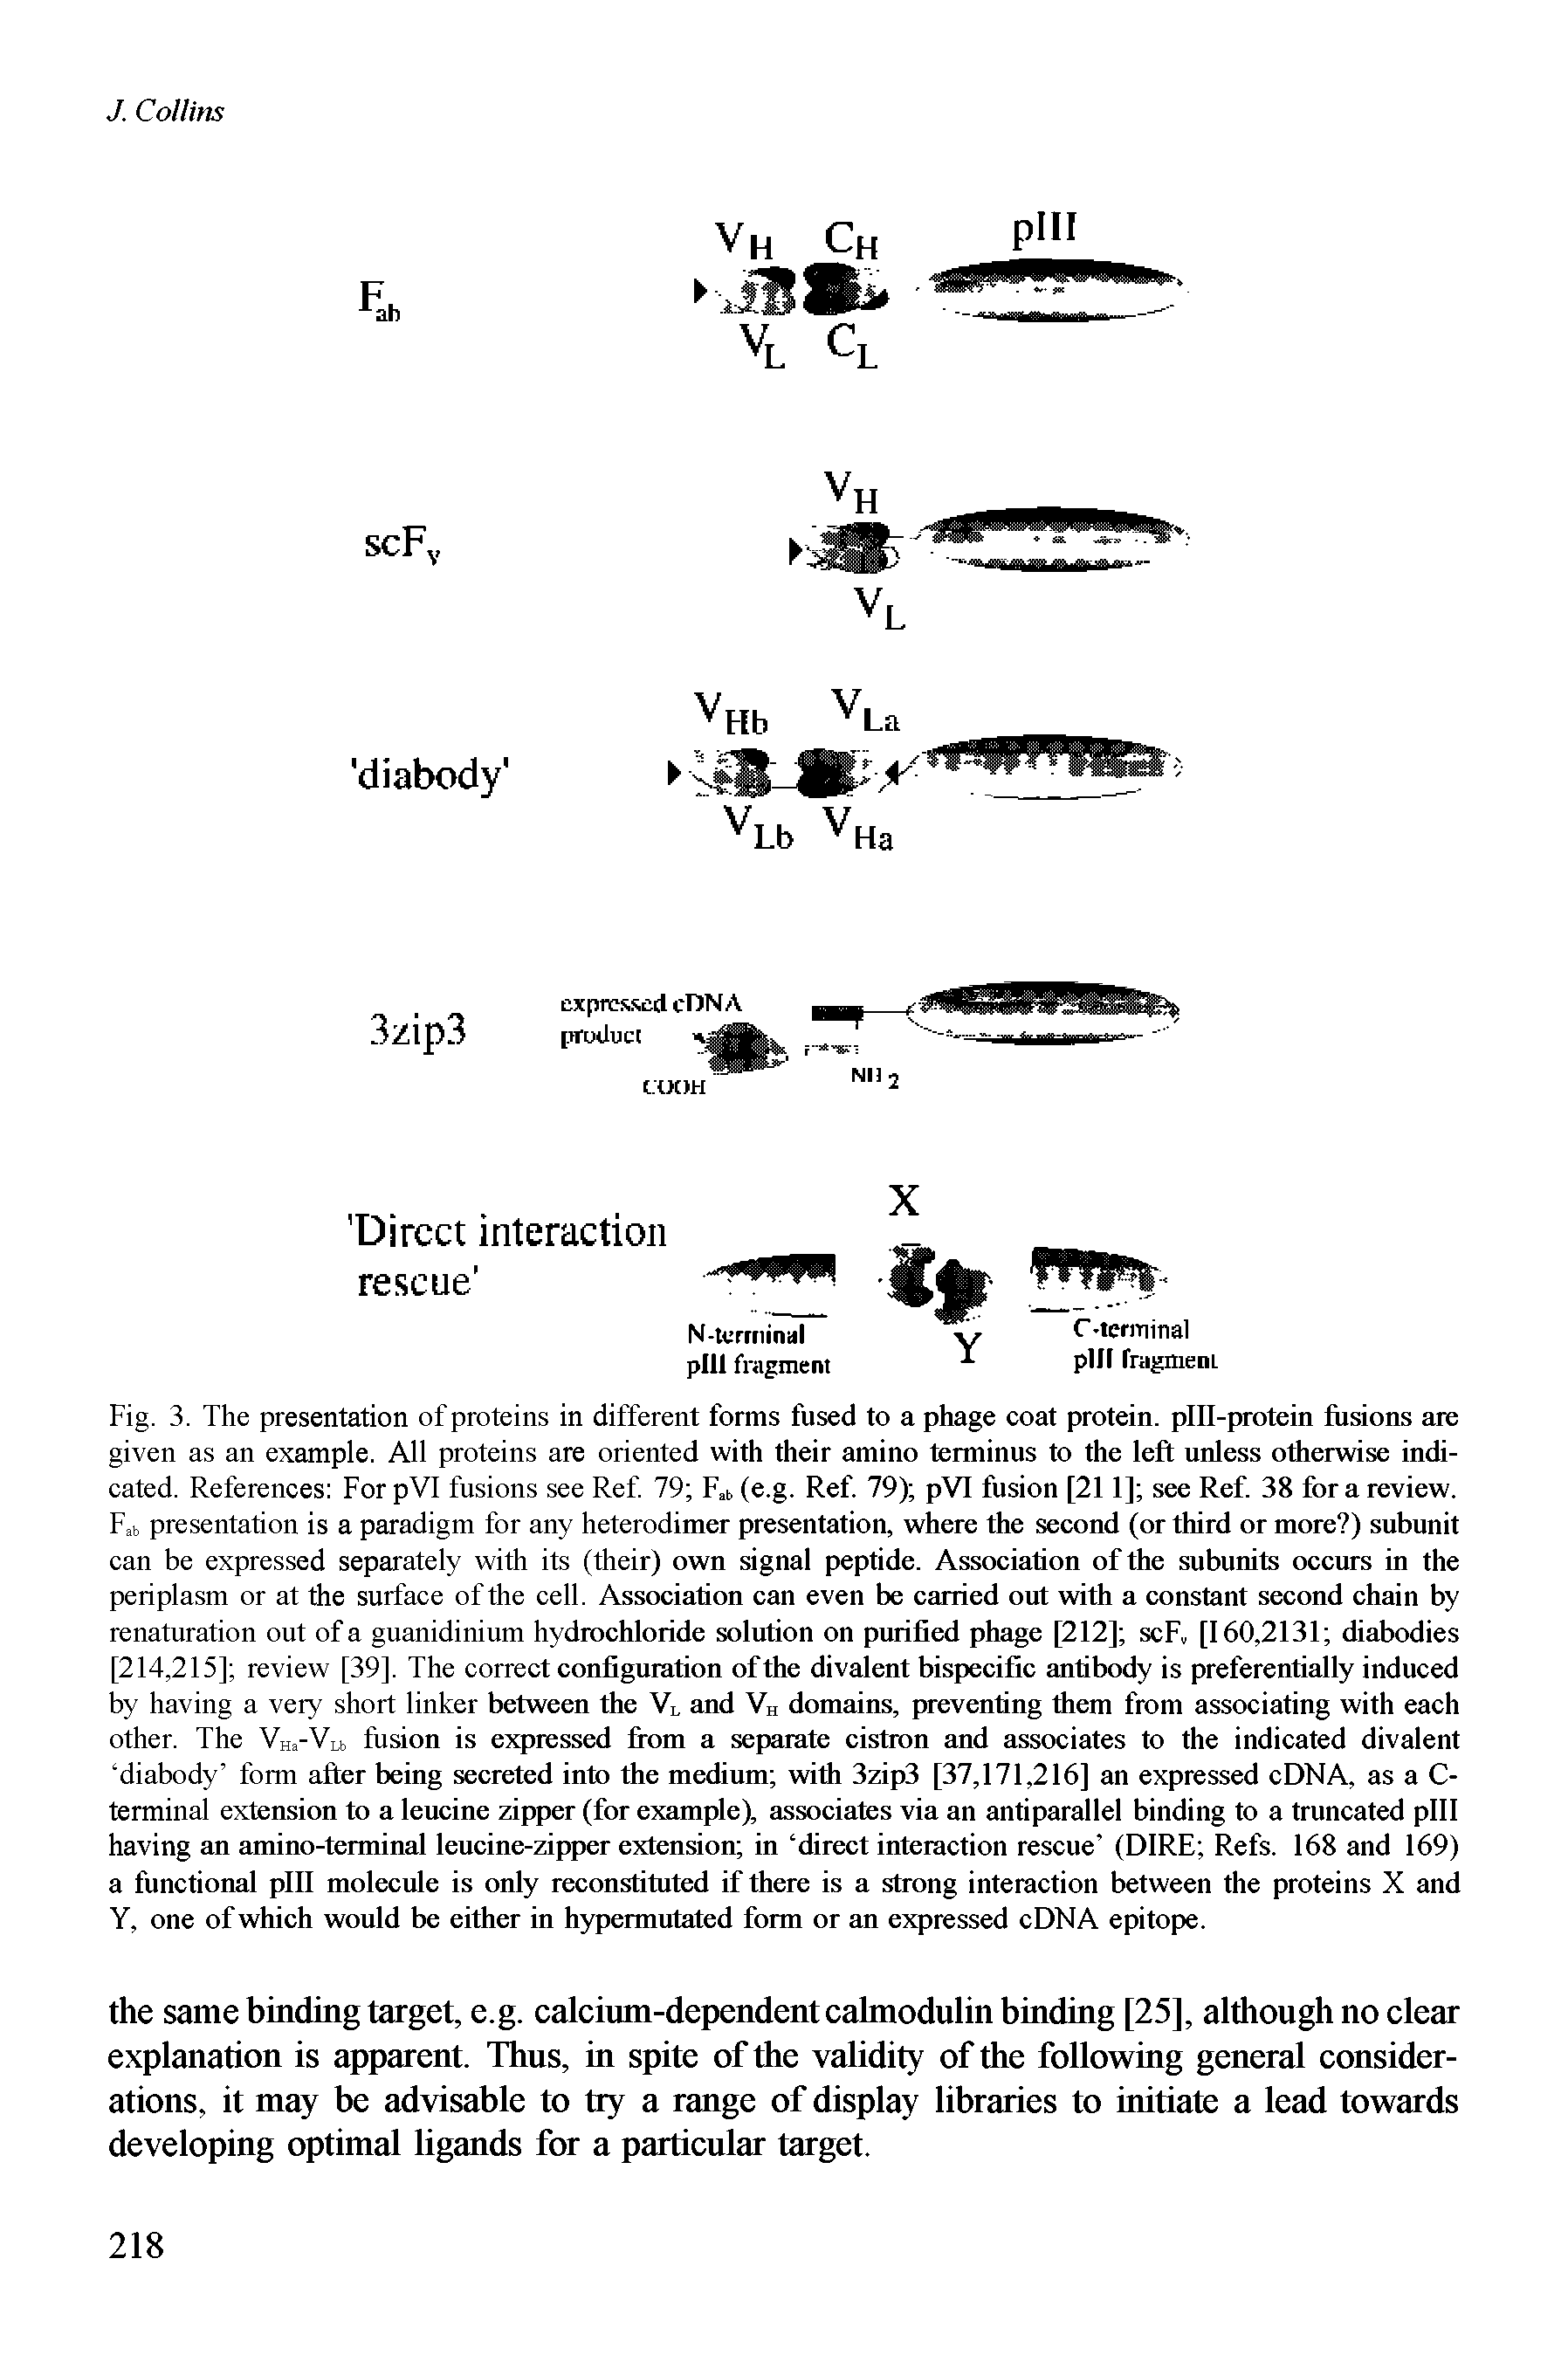 Fig. 3. The presentation of proteins in different forms fused to a phage coat protein, pill-protein fusions are given as an example. All proteins are oriented with their amino terminus to the left unless otherwise indicated. References For pVI fusions see Ref. 79 F,b (e.g. Ref. 79) pVI fusion [211] see Ref. 38 for a review.